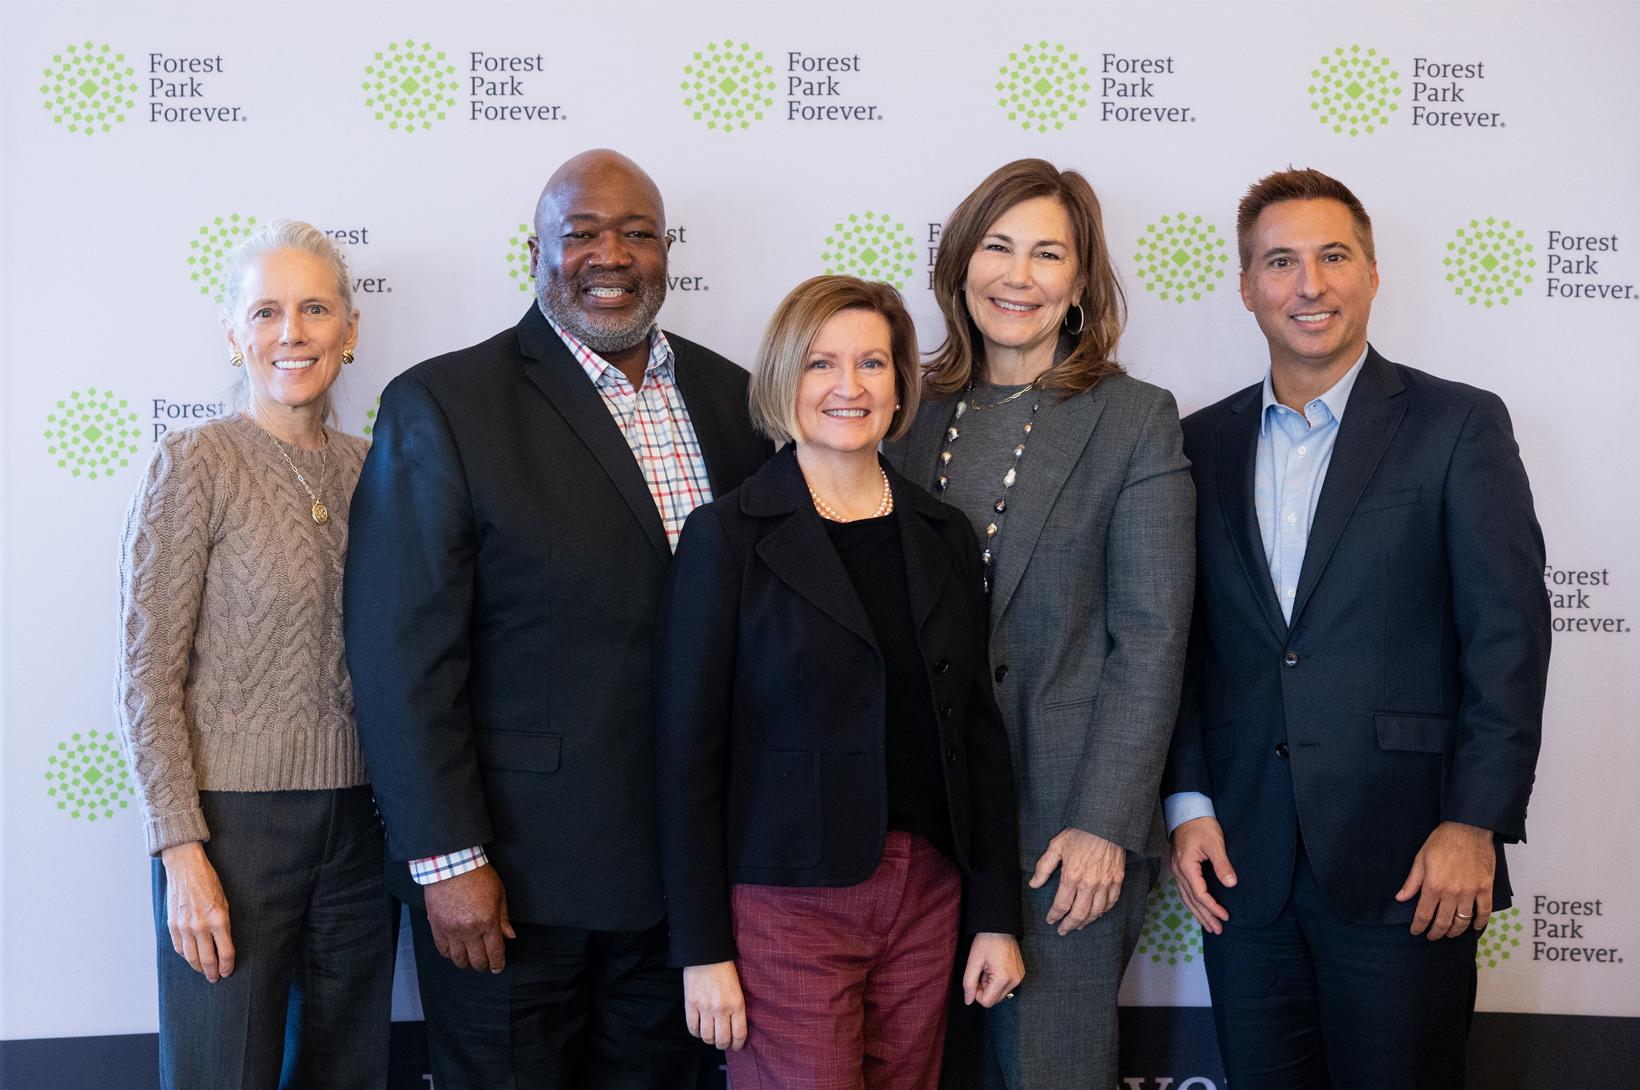 A group of civic leaders pose for a photo at a Forest Park Forever breakfast